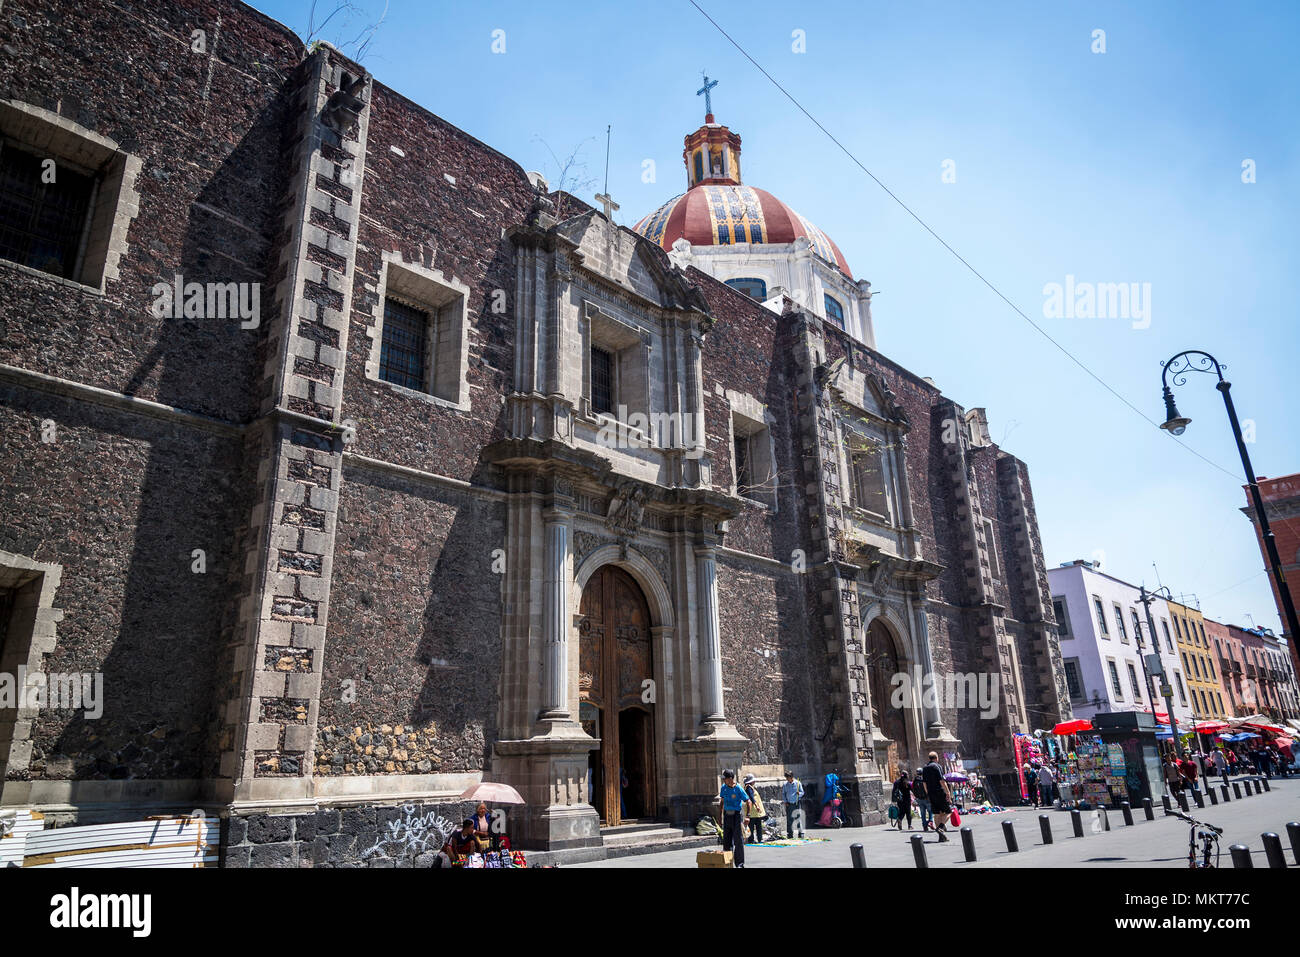 Museo Nacional de las Culturas, museum dedicated to education about the world's cultures, Mexico City, Mexico Stock Photo